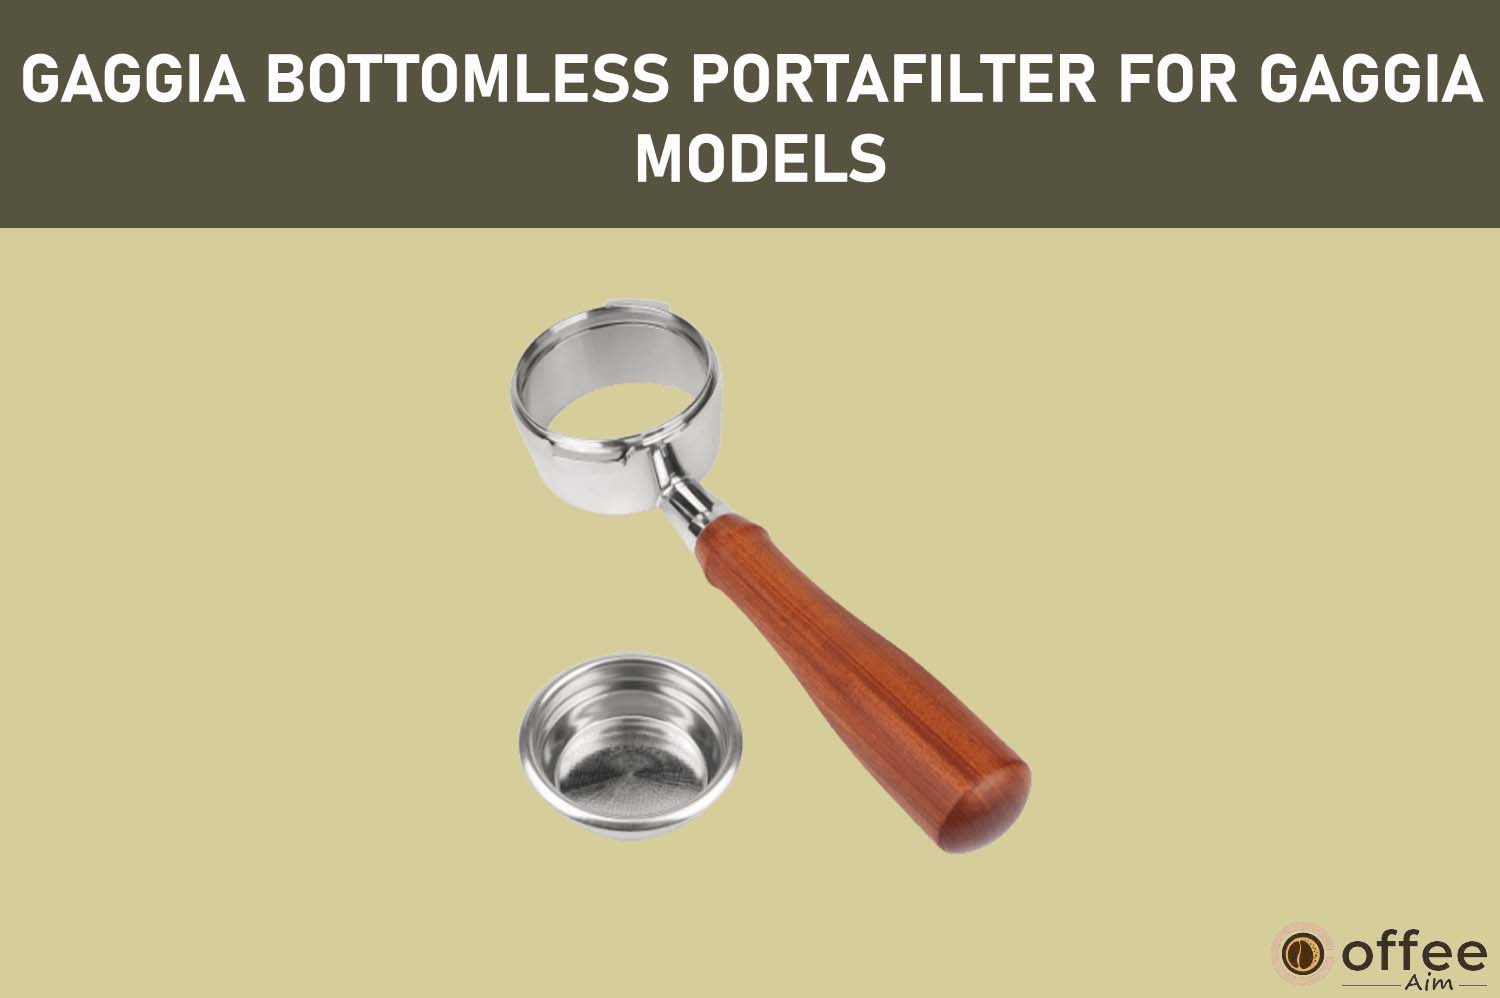 feature image for the article "Gaggia Bottomless Portafilter for Gaggia Models"